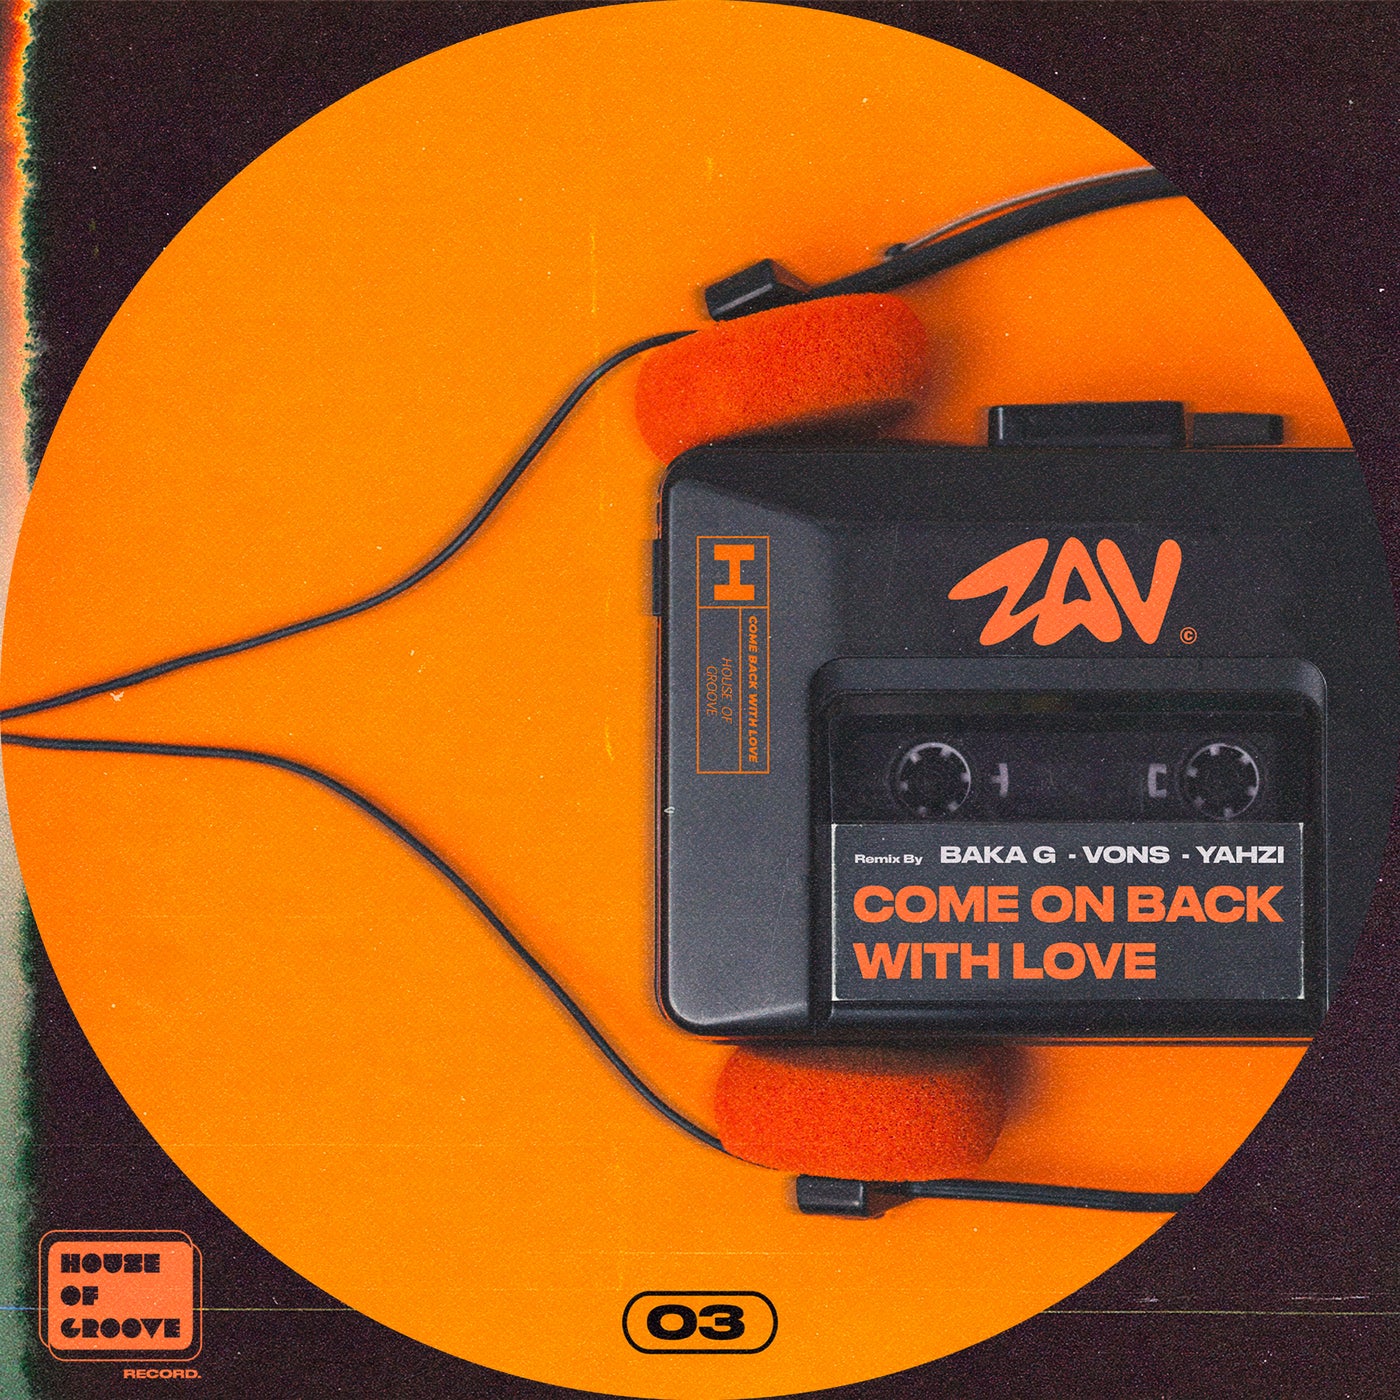 Cover - ZAV - Come on back with love (Original Mix)